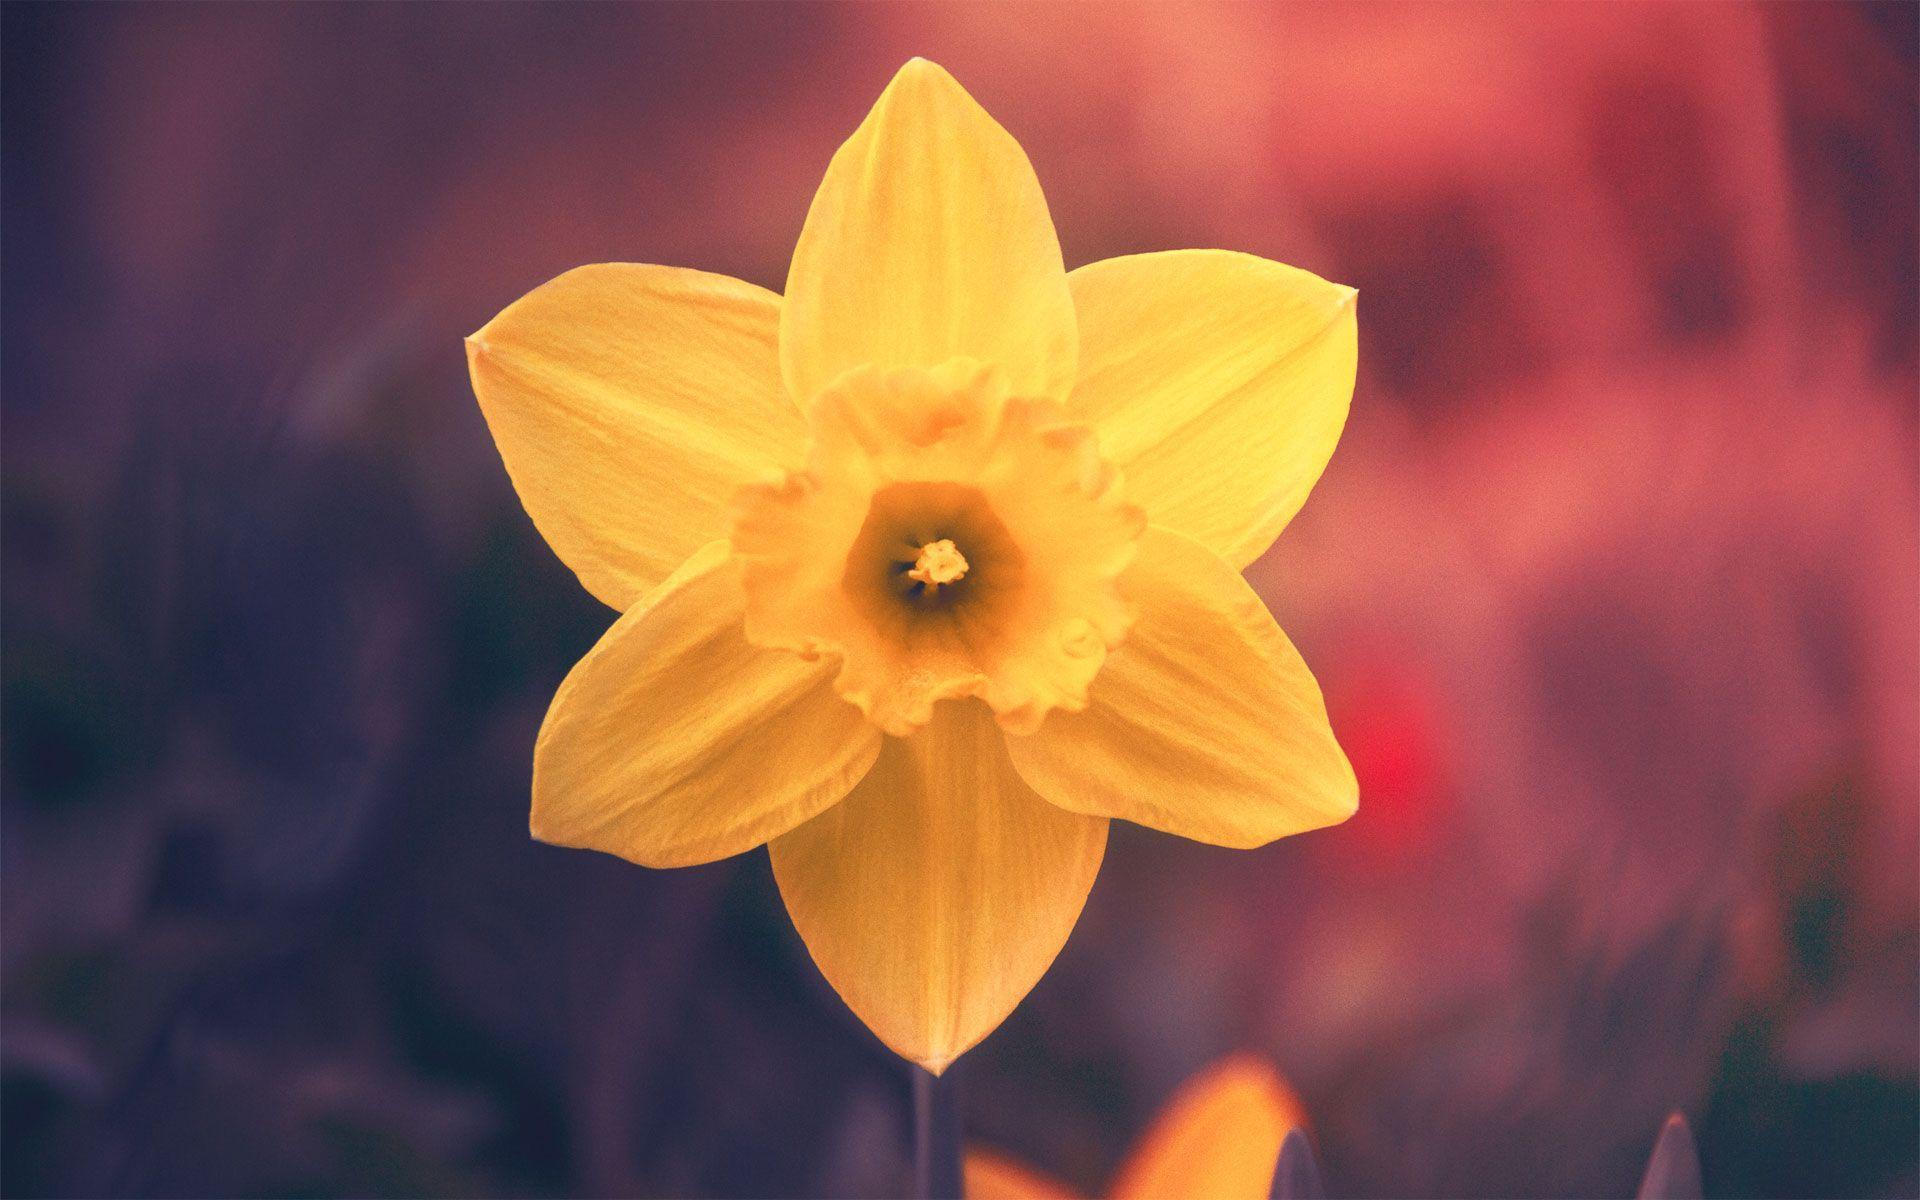 Stunning Yellow Flowers Wallpapers 16774 1920x1200 px